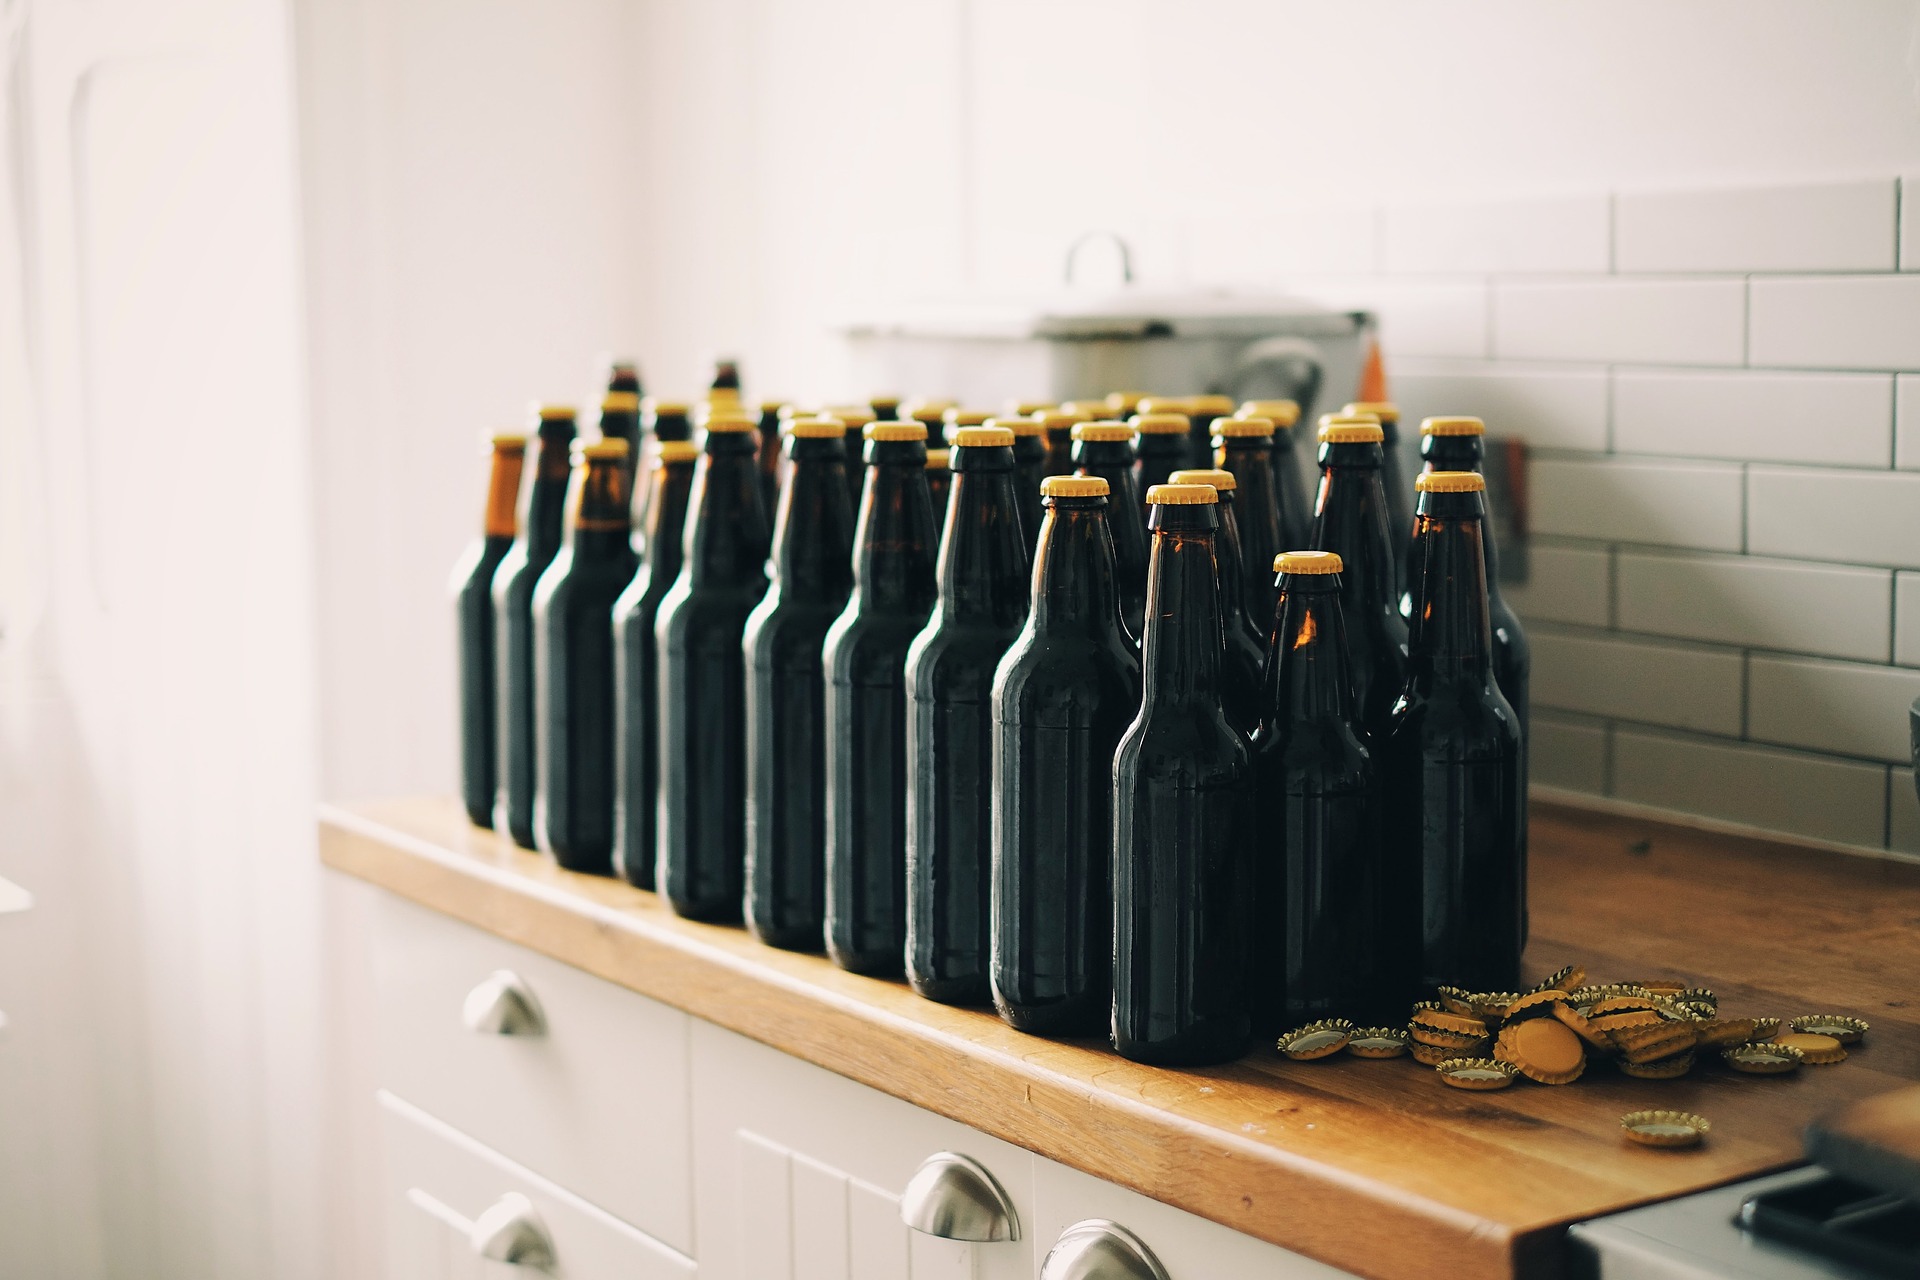 Empty beer bottles is one of the signs of a drinking problem.